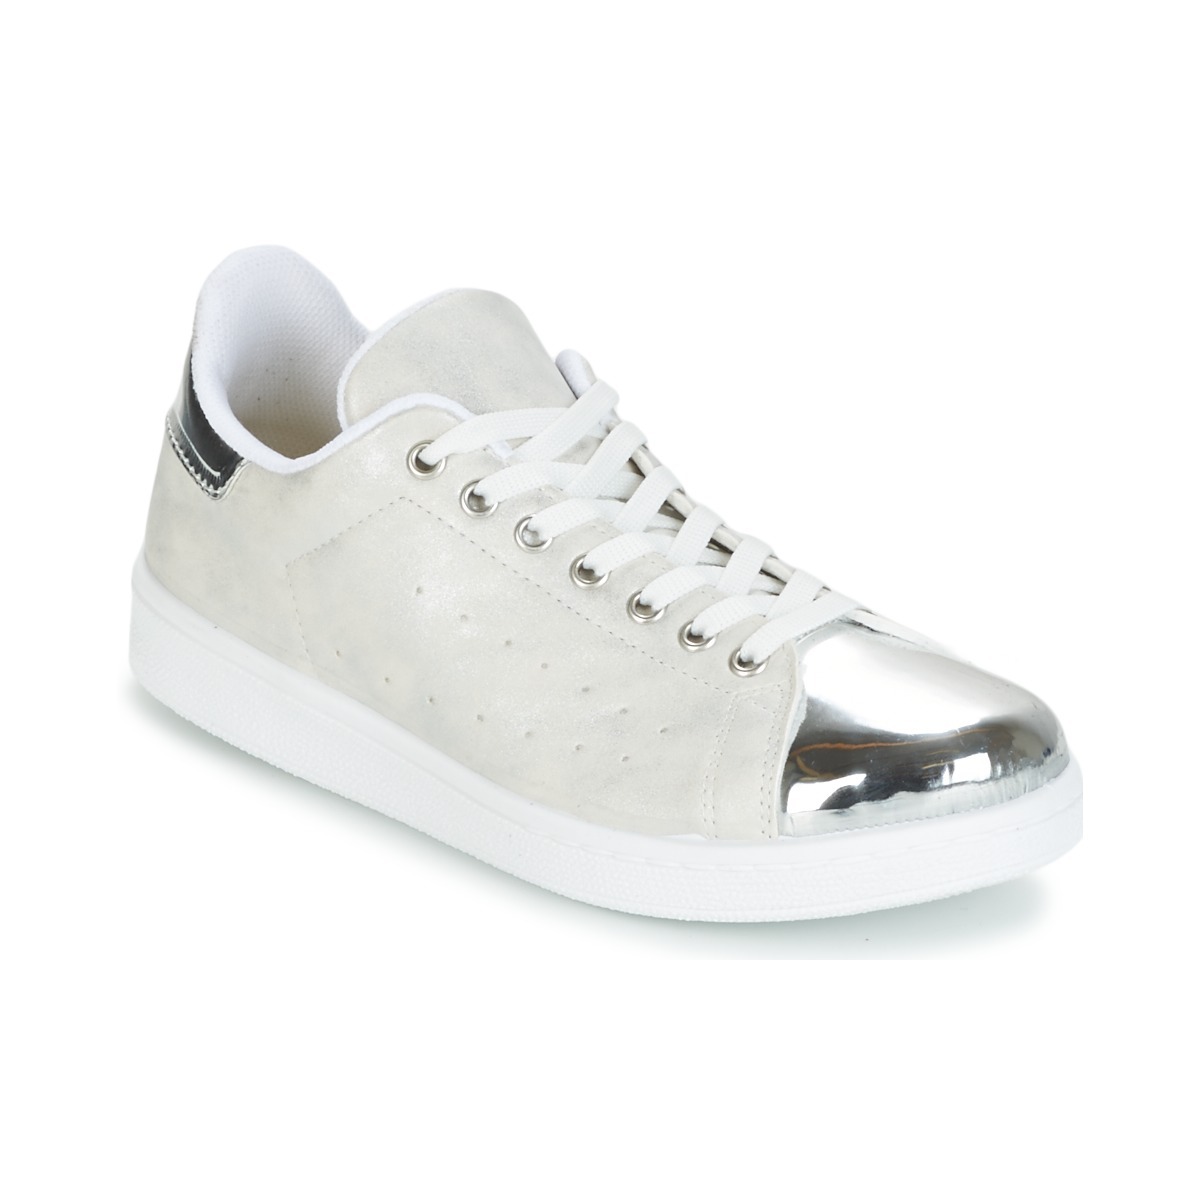 Spartoo - Grey Sneakers for Women from Yurban GOOFASH